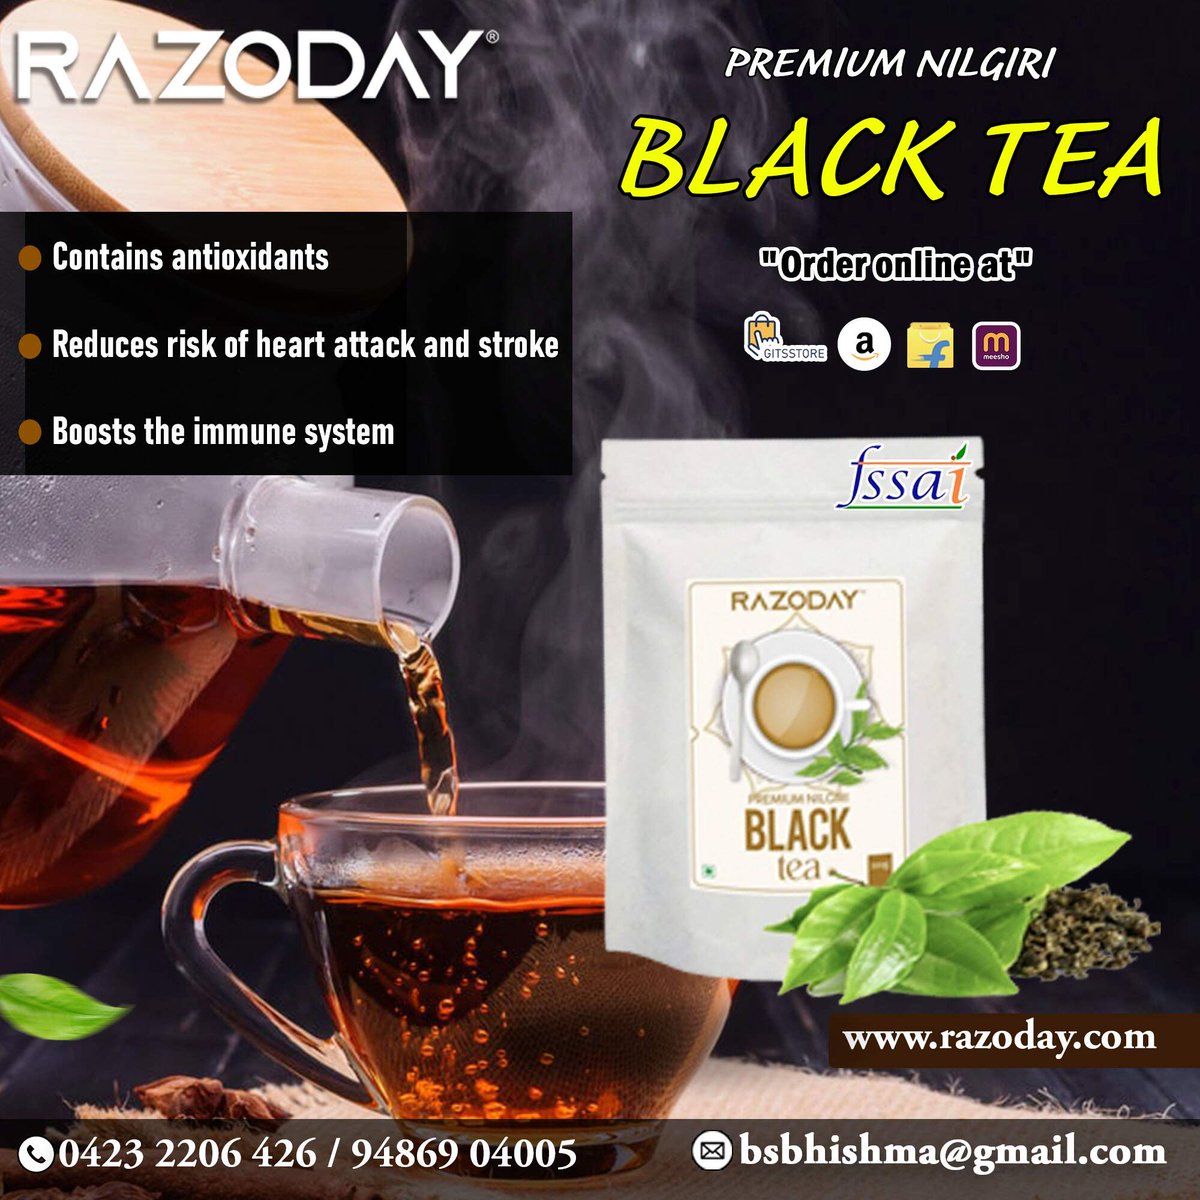 RAZODAY - PREMIUM NILGIRI BLACK TEA

- Contains antioxidants
- Reduces risk of heart attack and stroke
- Boosts the immune system

#RAZODAY #SriVinayagaEnterprises #blacktea  #premiumnilgiriblacktea #qualityingredients #unmatchedtaste #shoponlinenow #onlineshoping #shoponline